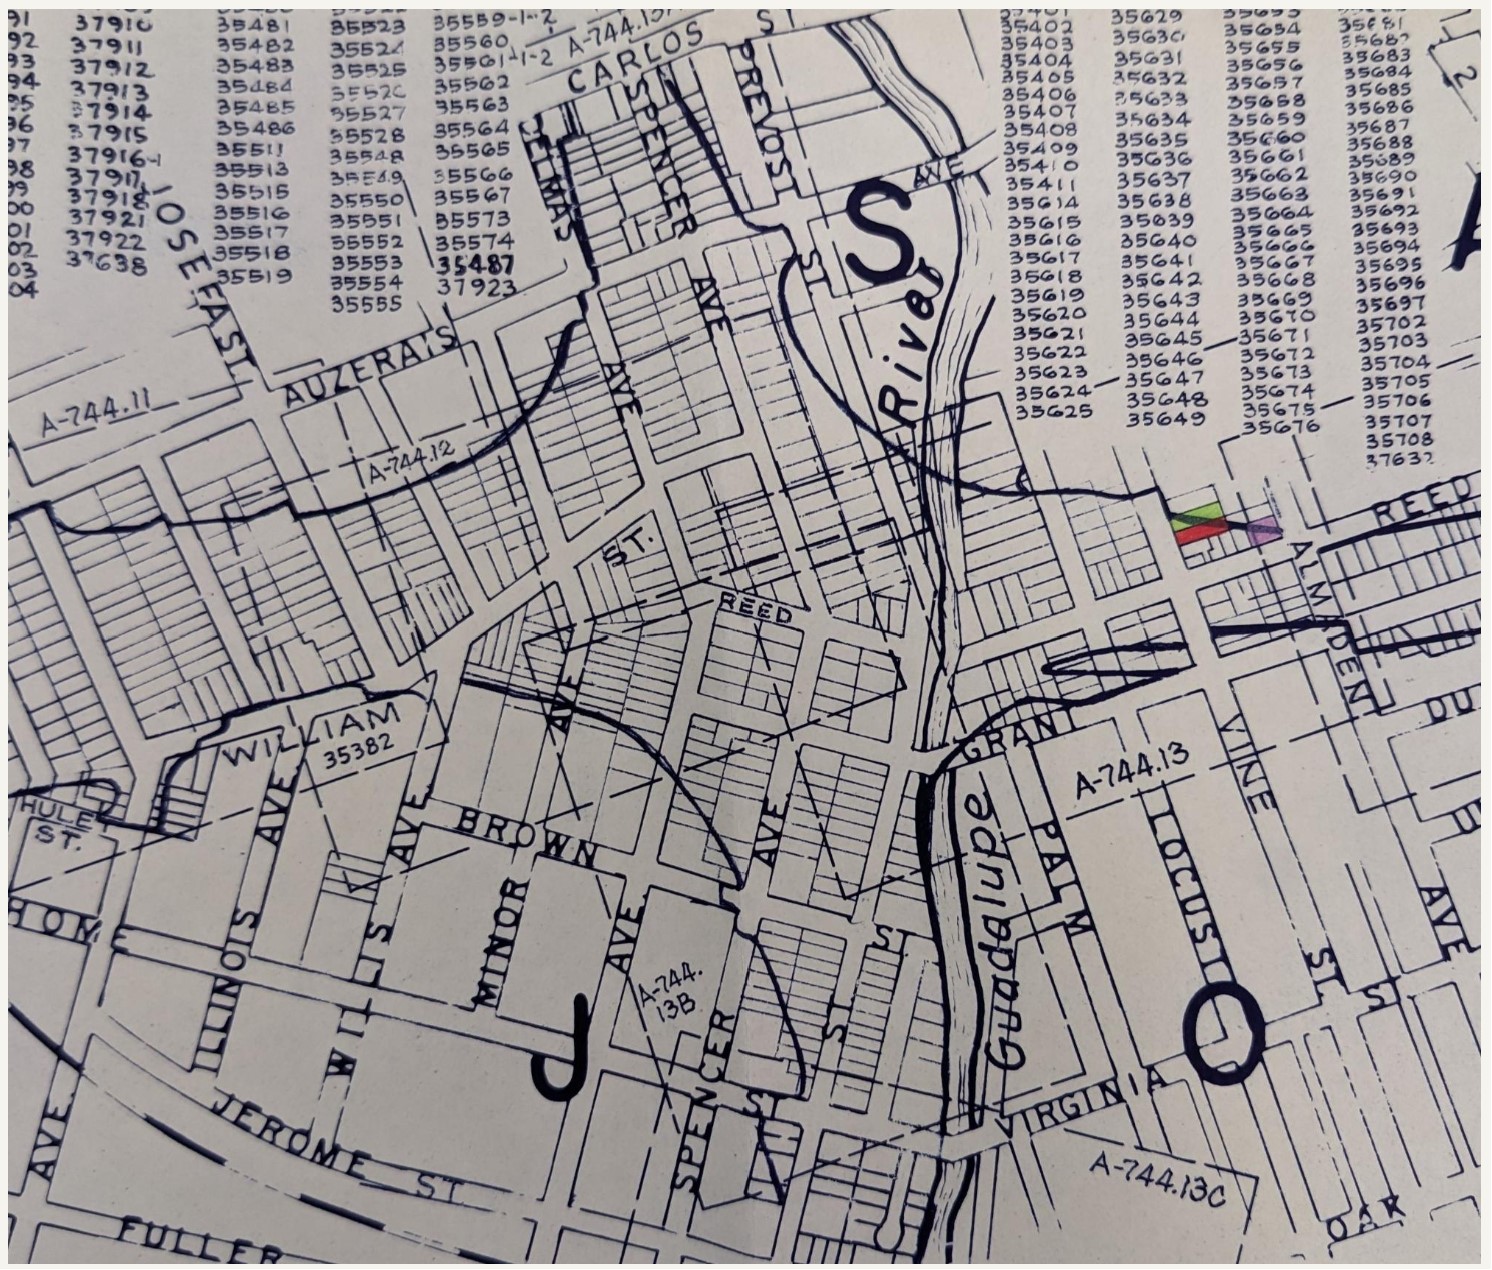 Archival image of freeway plans